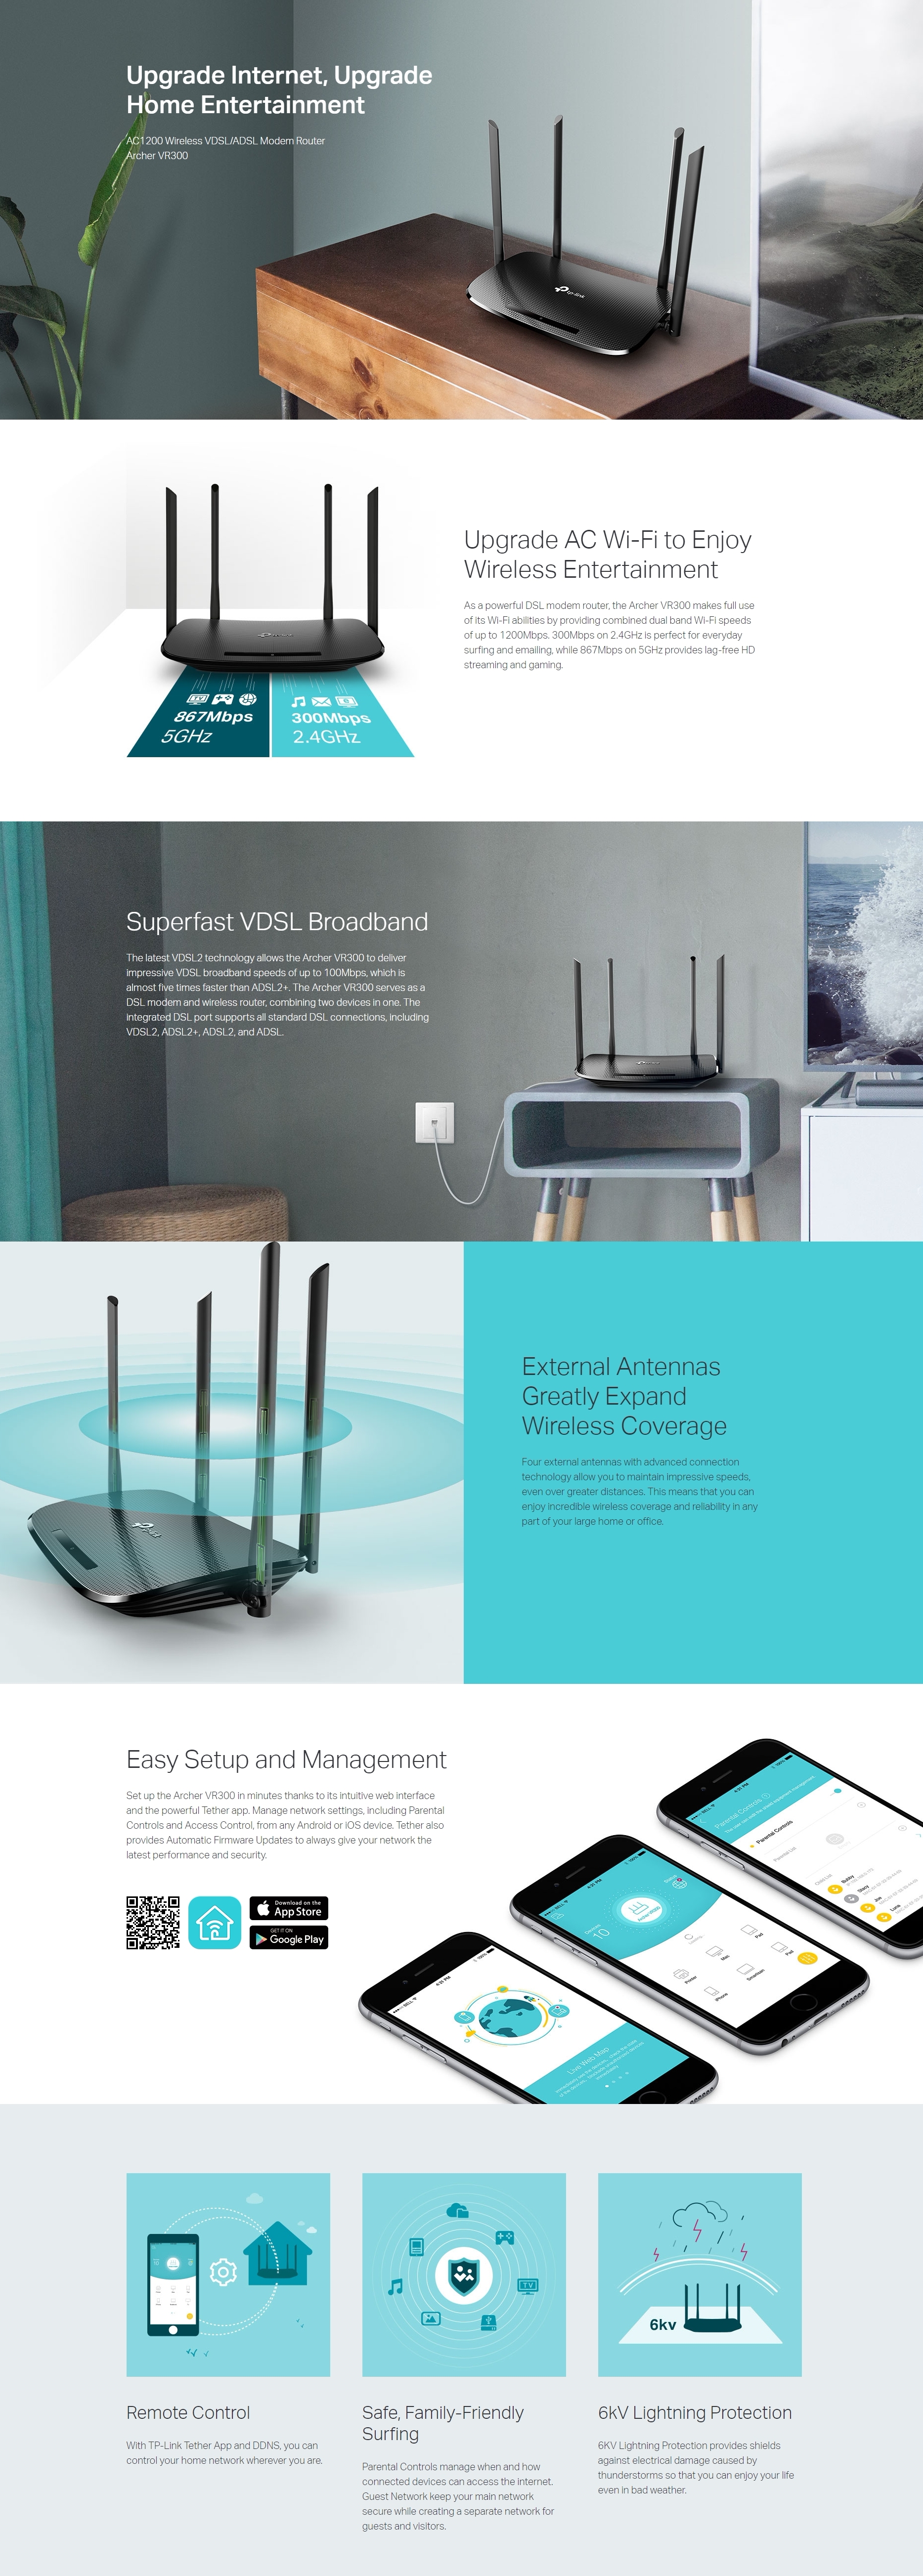 A large marketing image providing additional information about the product TP-Link Archer VR300 - AC1200 VDSL/ADSL Wi-Fi 5 Modem Router - Additional alt info not provided